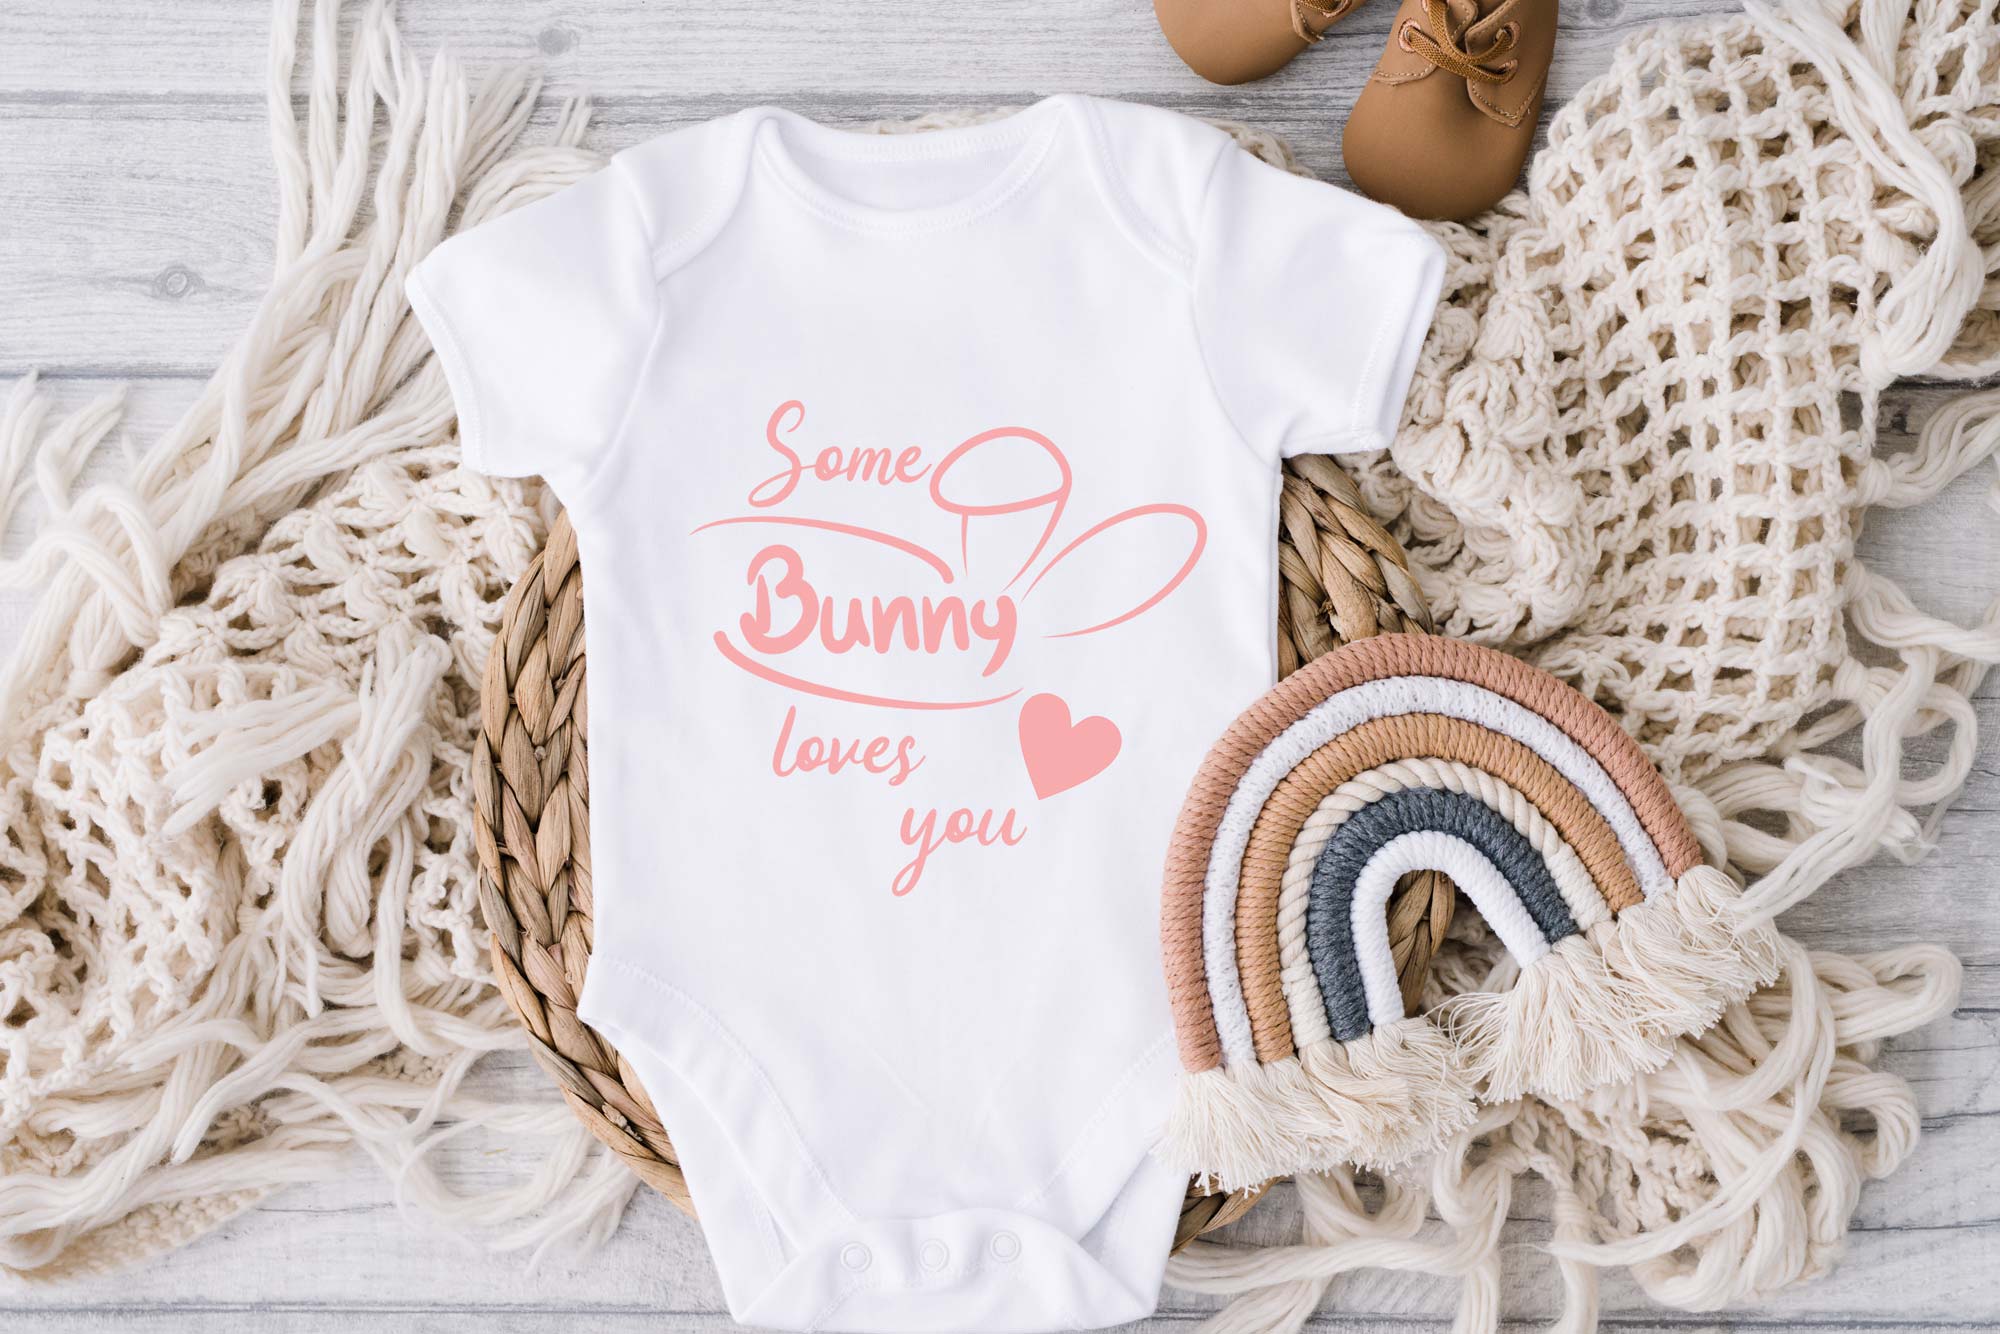 Some Bunny loves you Baby Vest pink